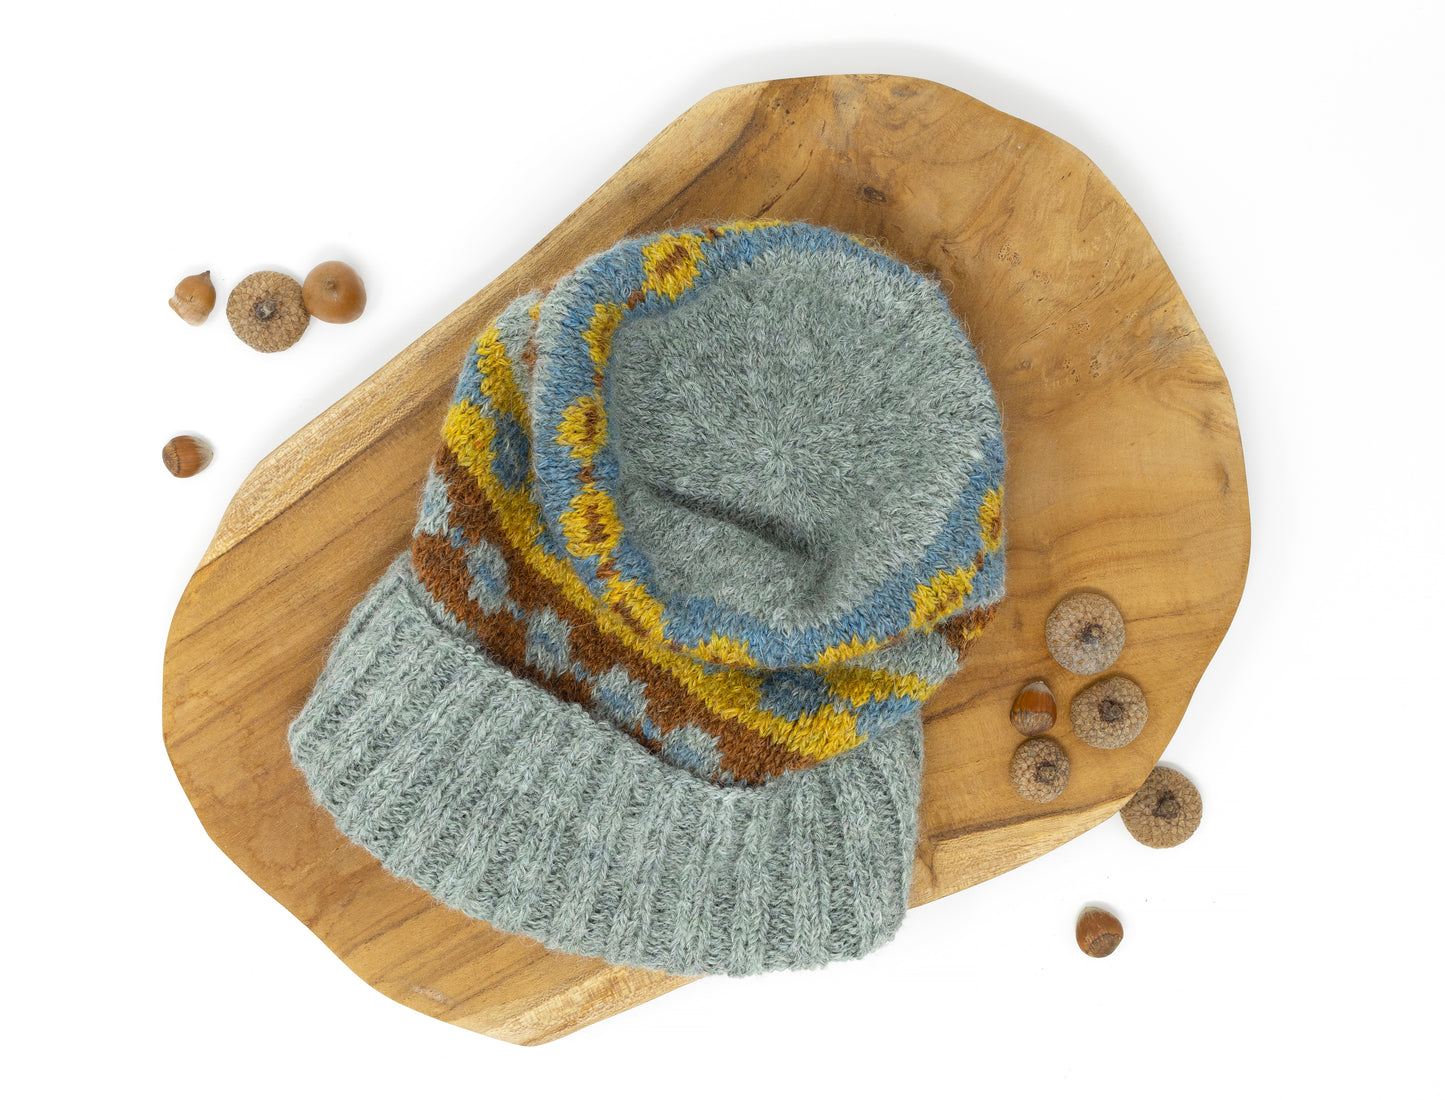 Grey, brown, yellow and blue alpaca wool hand-knitted Fair Isle hat